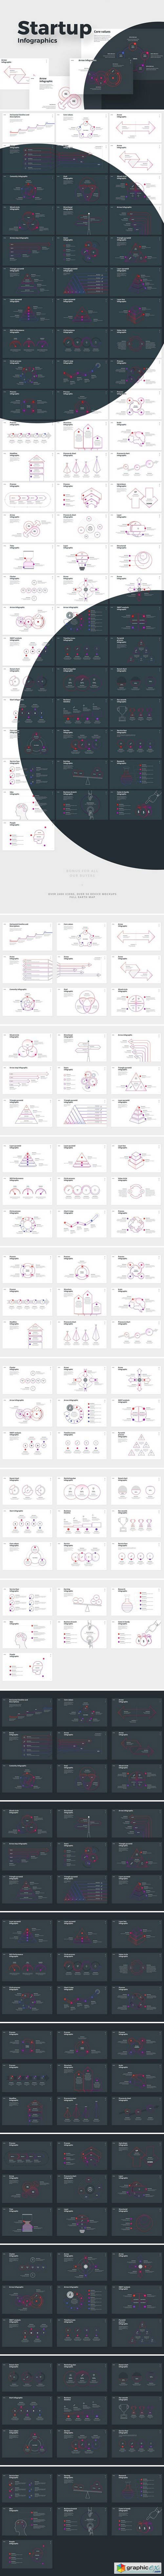 STARTUP powerpoint infographics